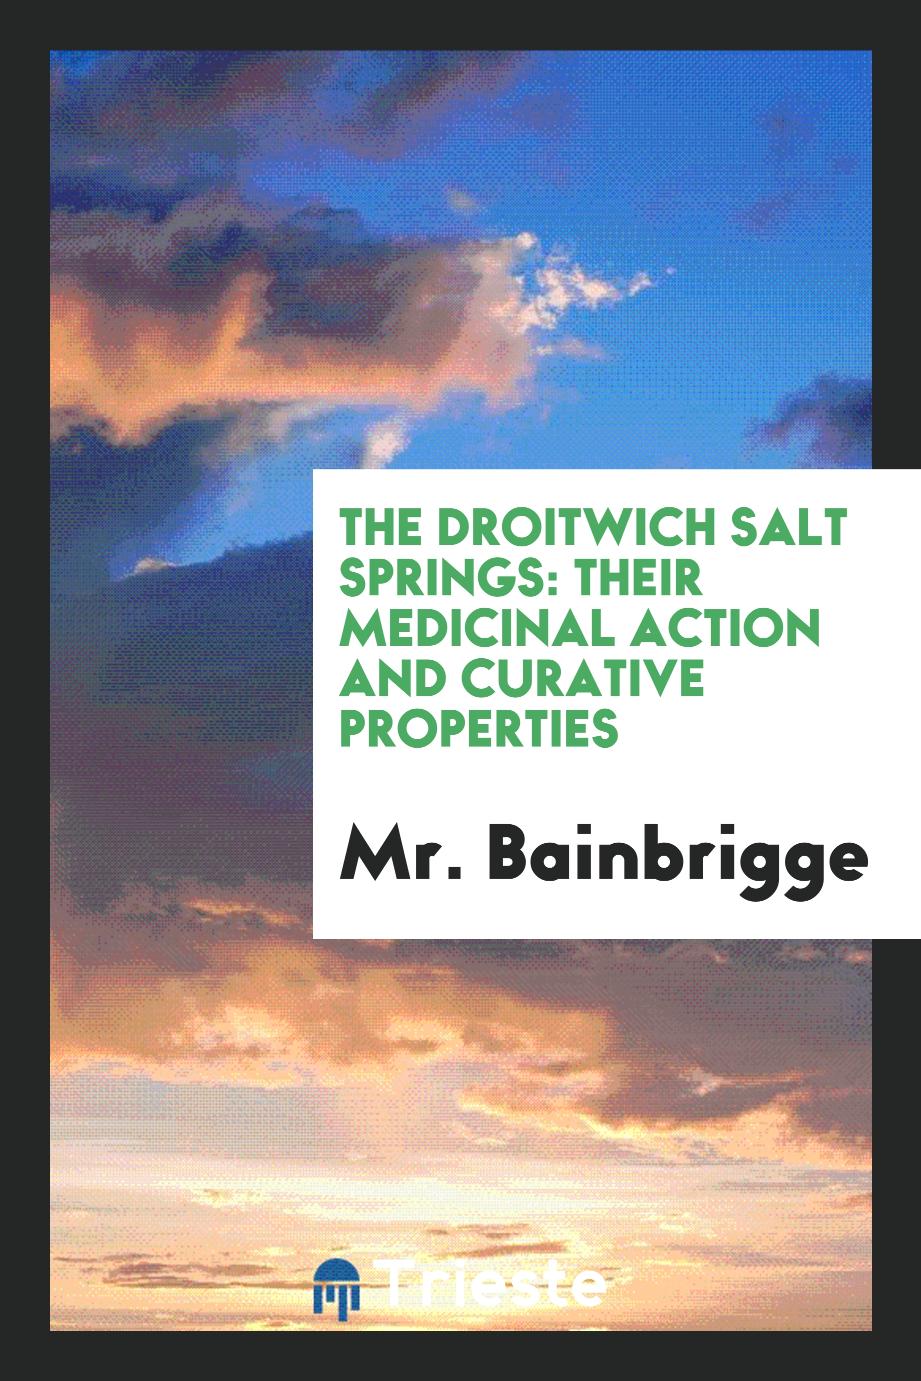 The Droitwich salt springs: their medicinal action and curative properties